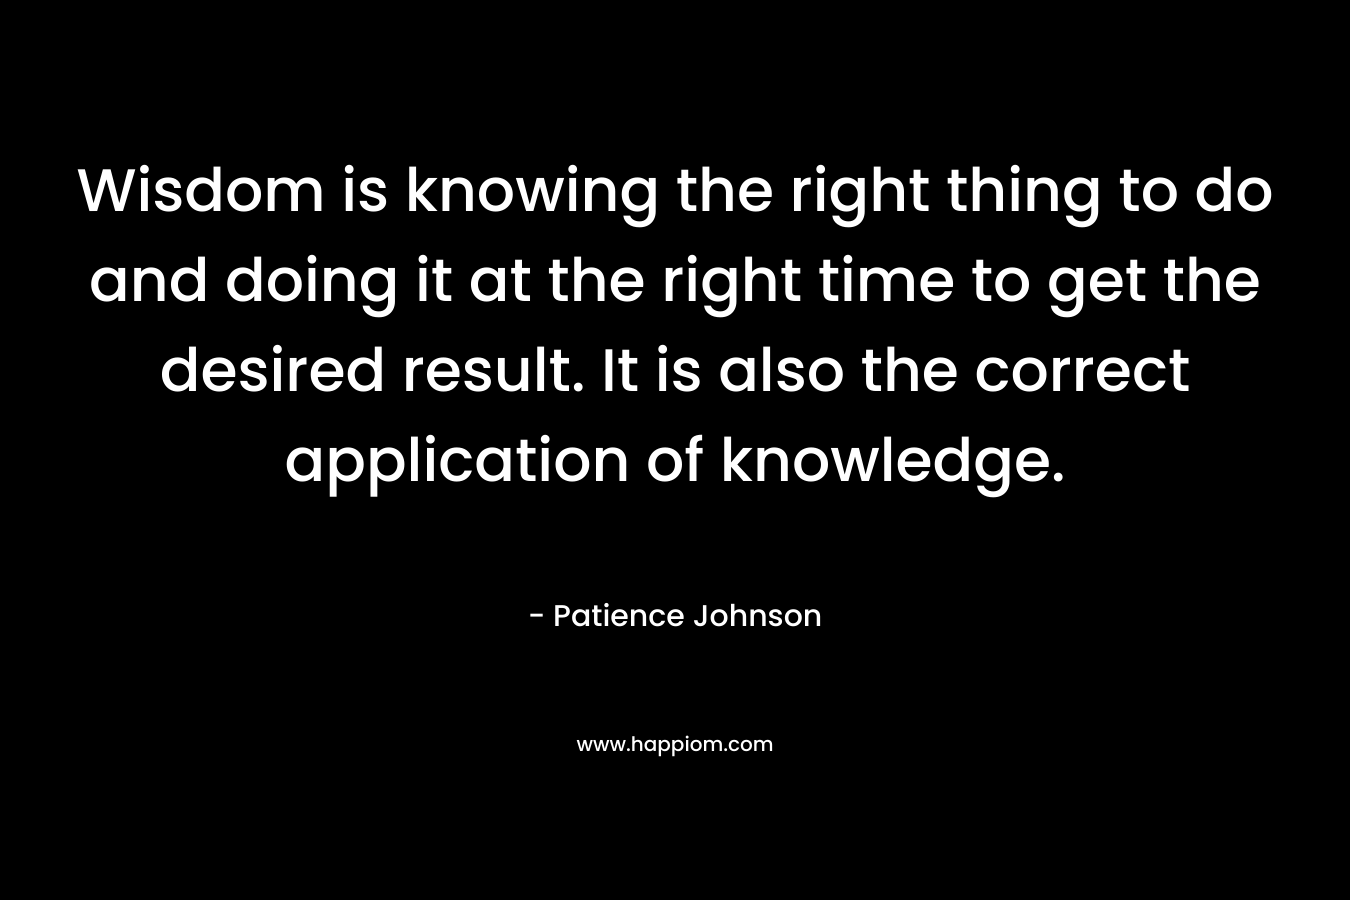 Wisdom is knowing the right thing to do and doing it at the right time to get the desired result. It is also the correct application of knowledge.